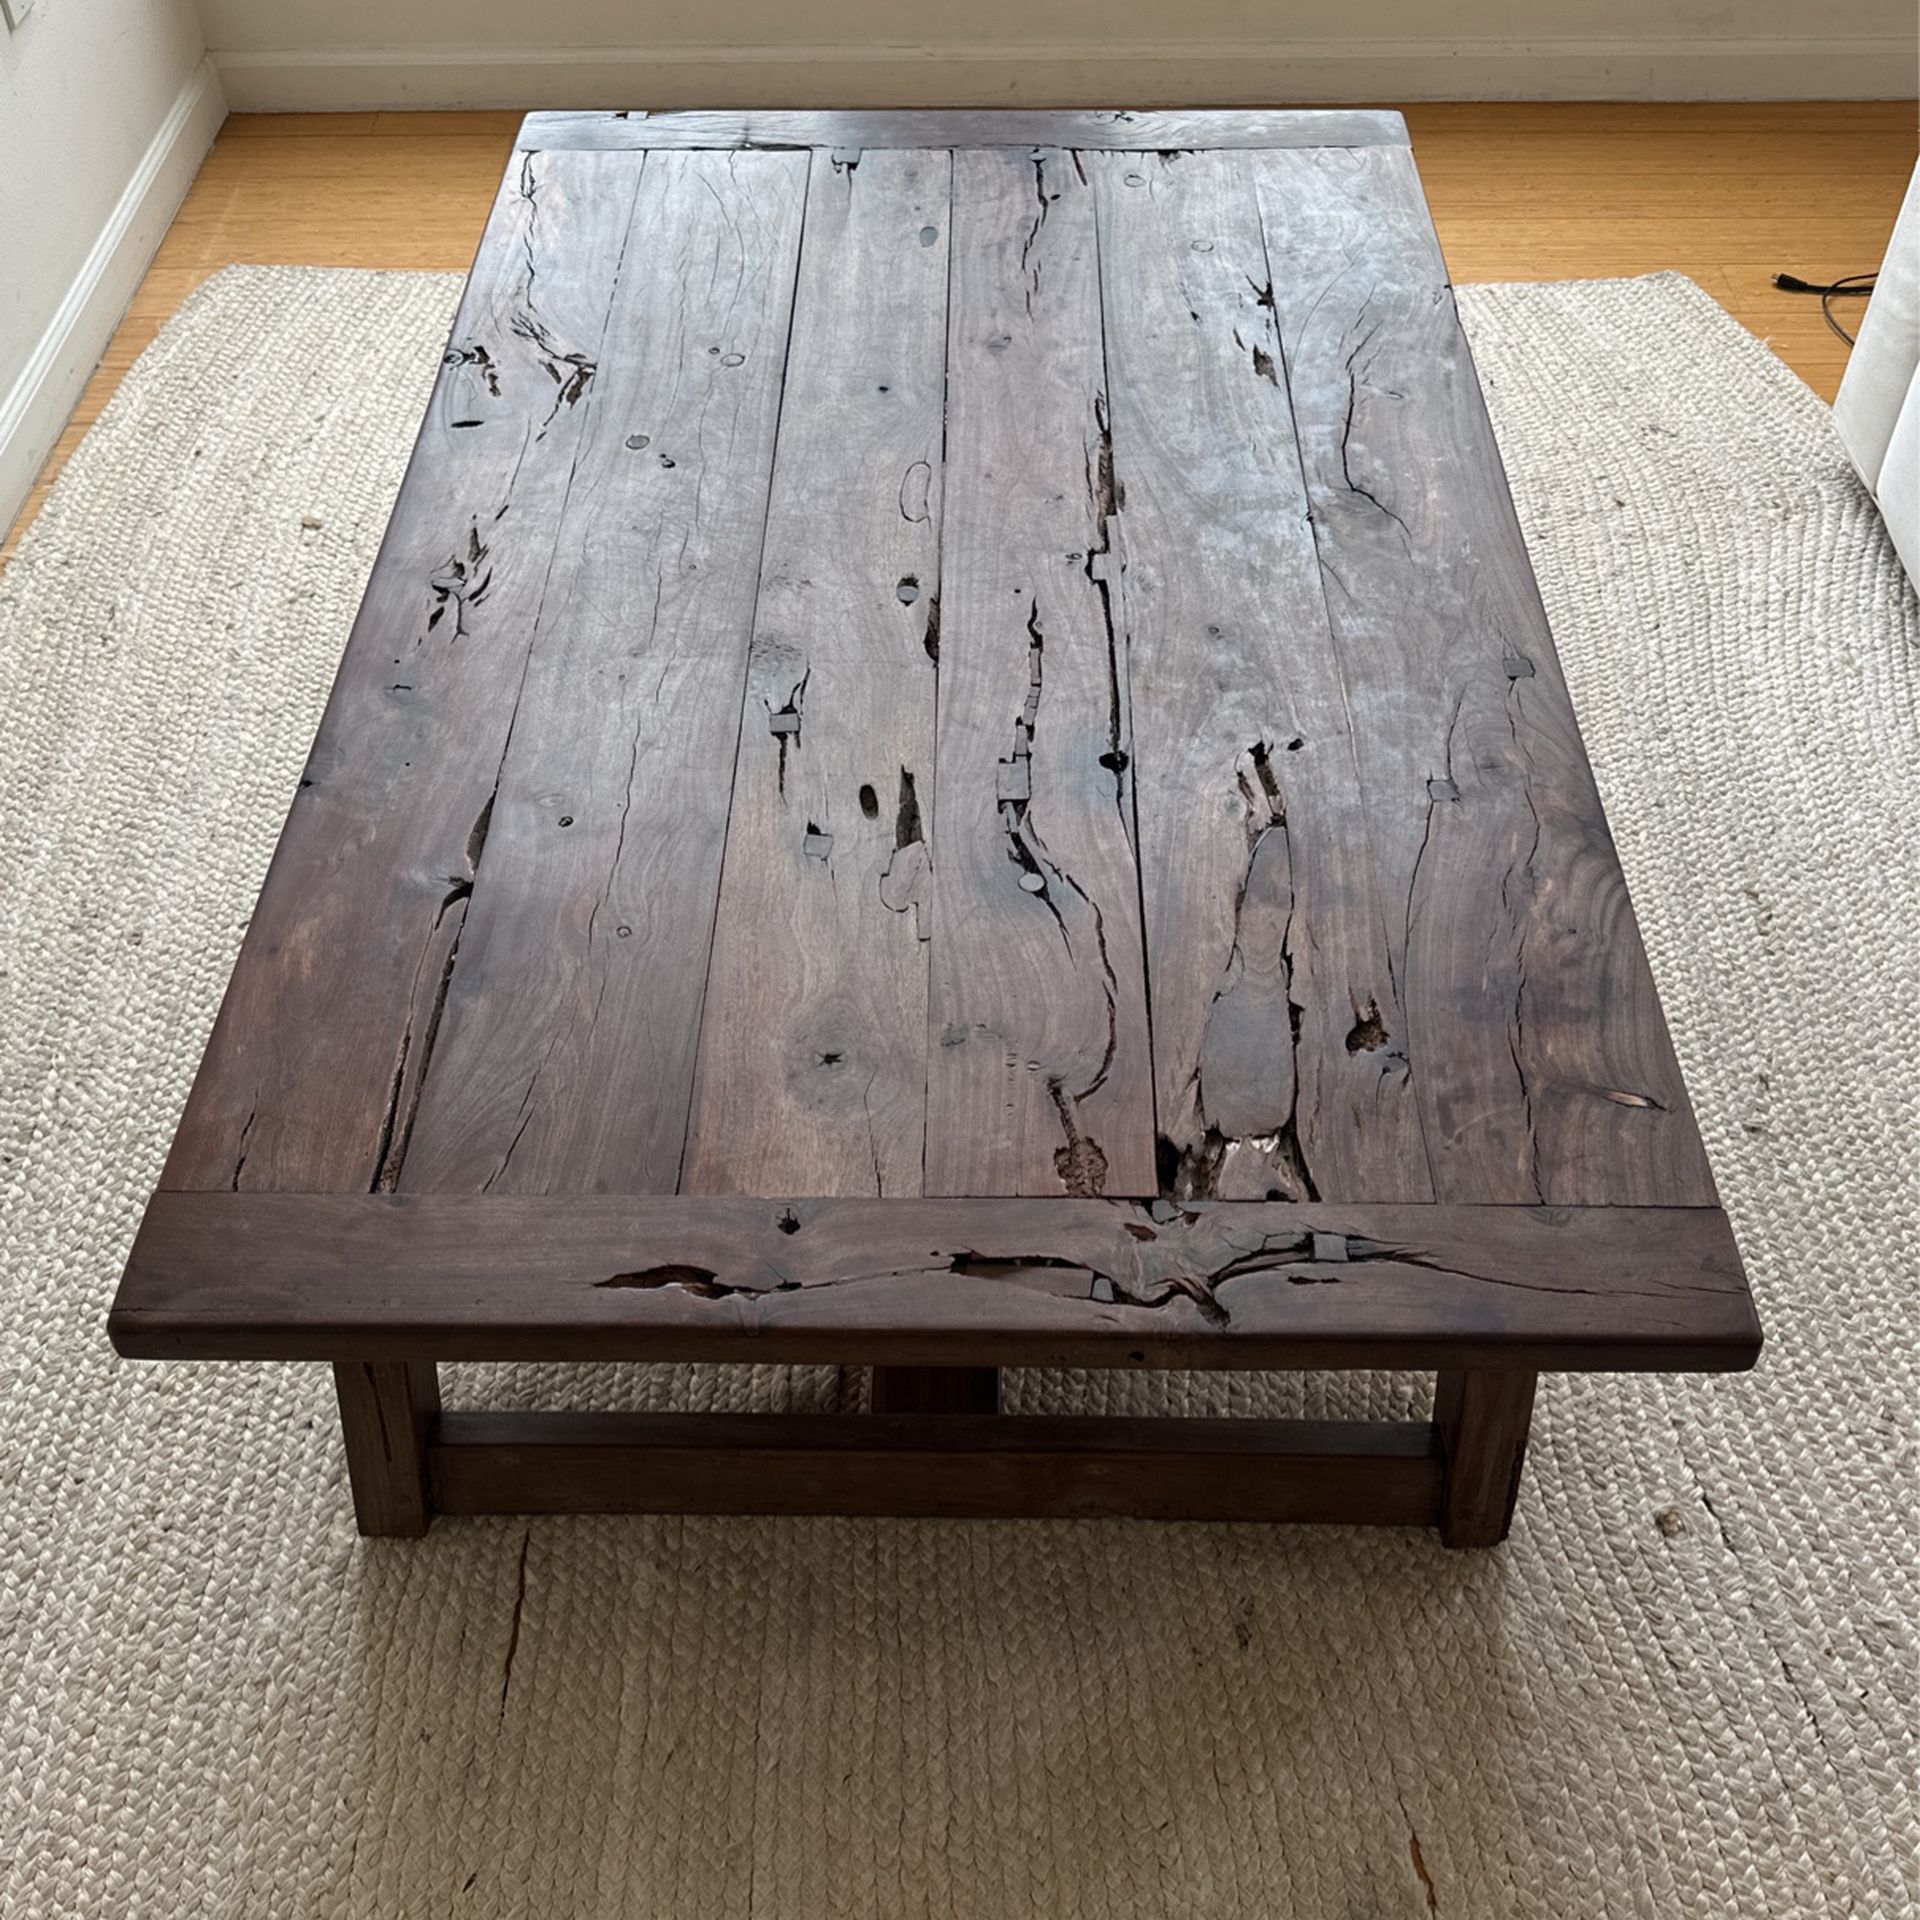 Antique Coffee Table (Wooden)